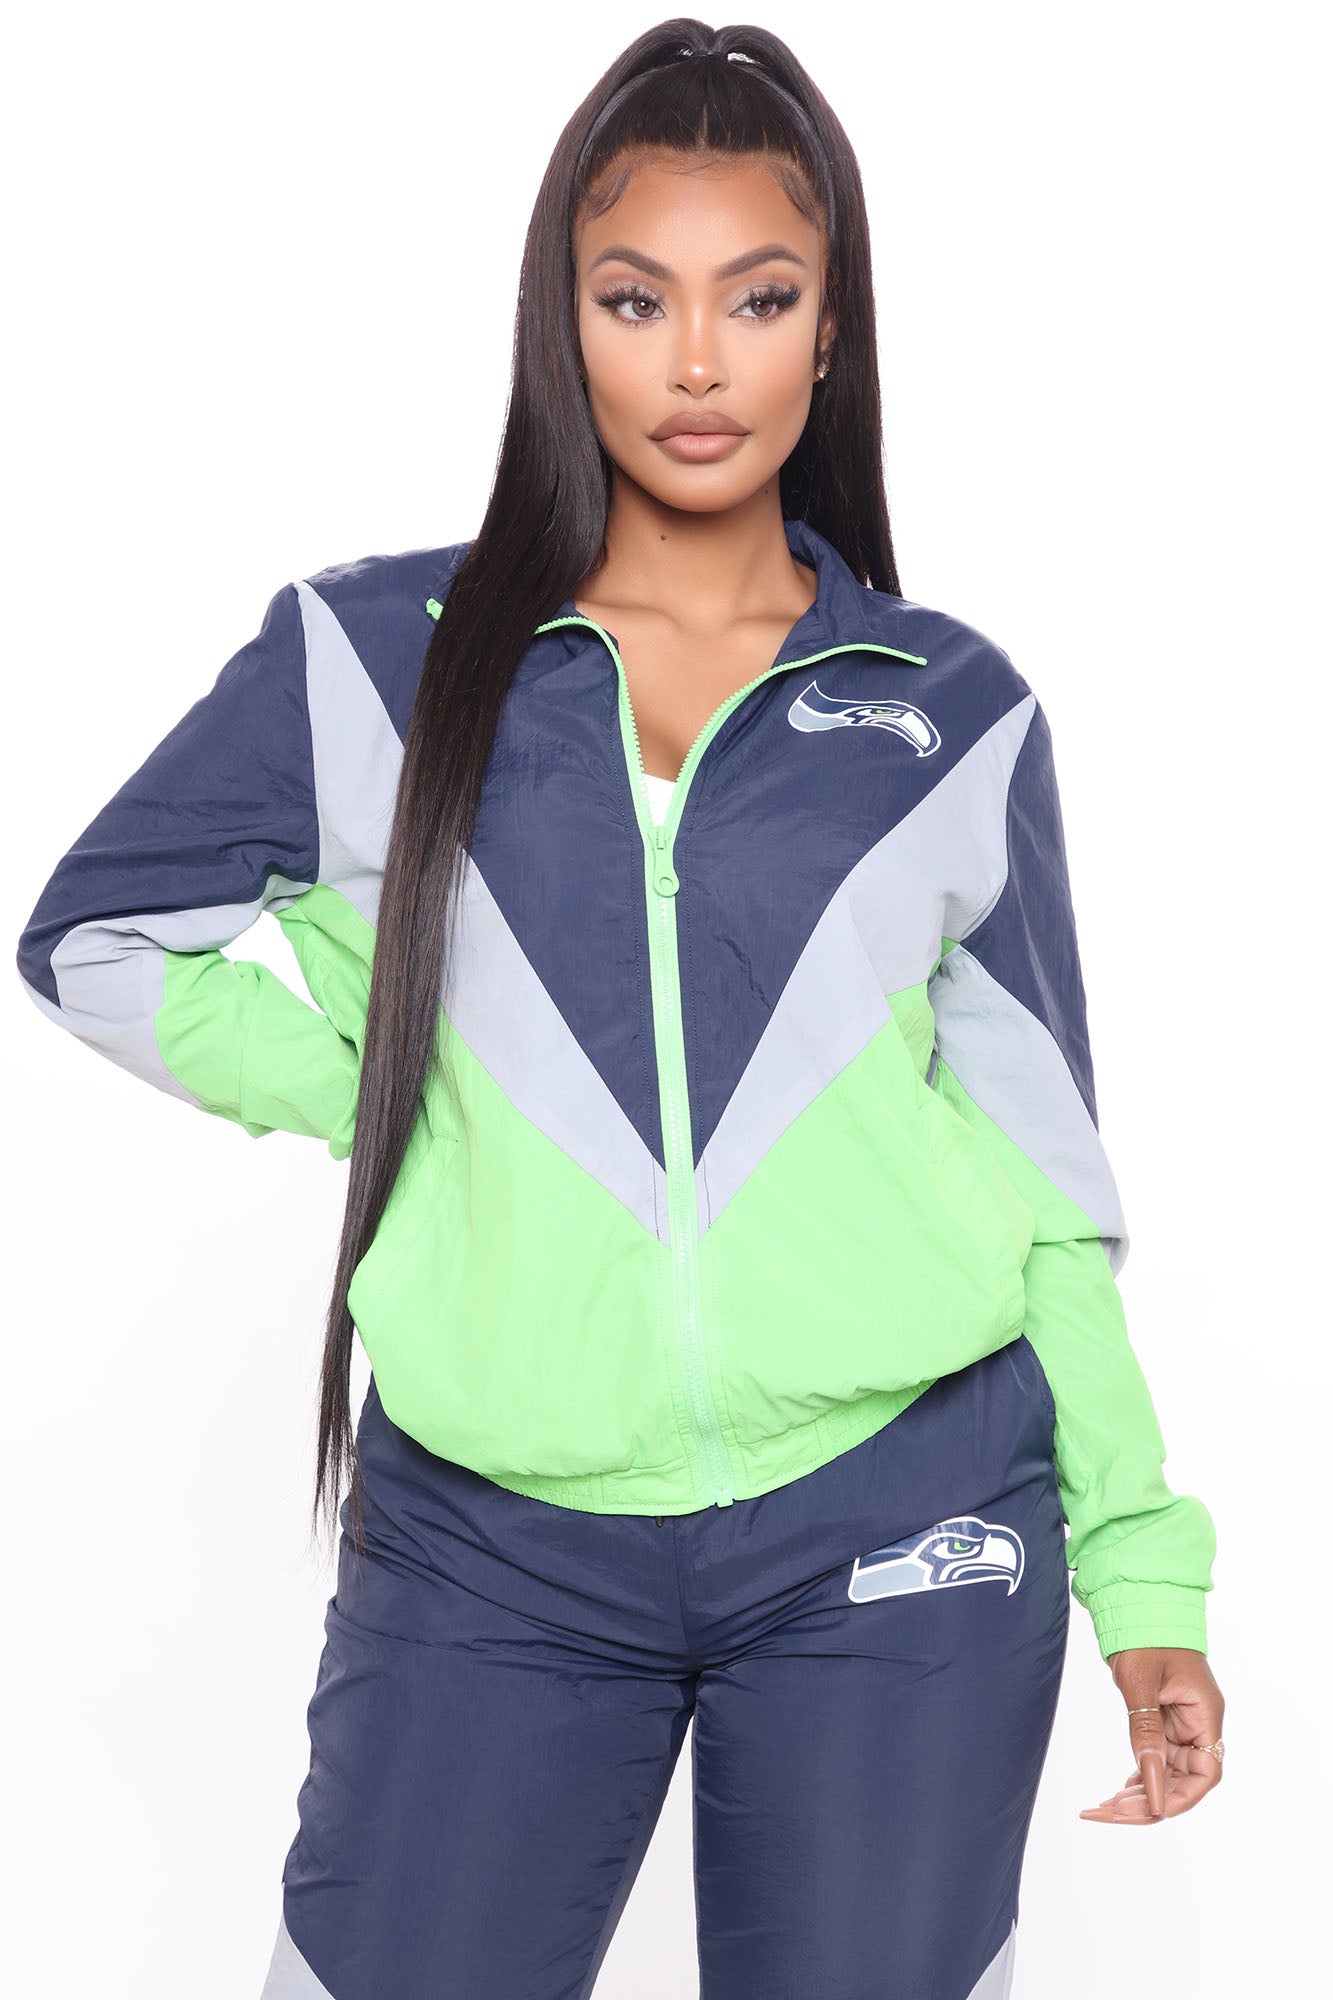 NFL Get That W Seahawks Track Jacket - Green/combo